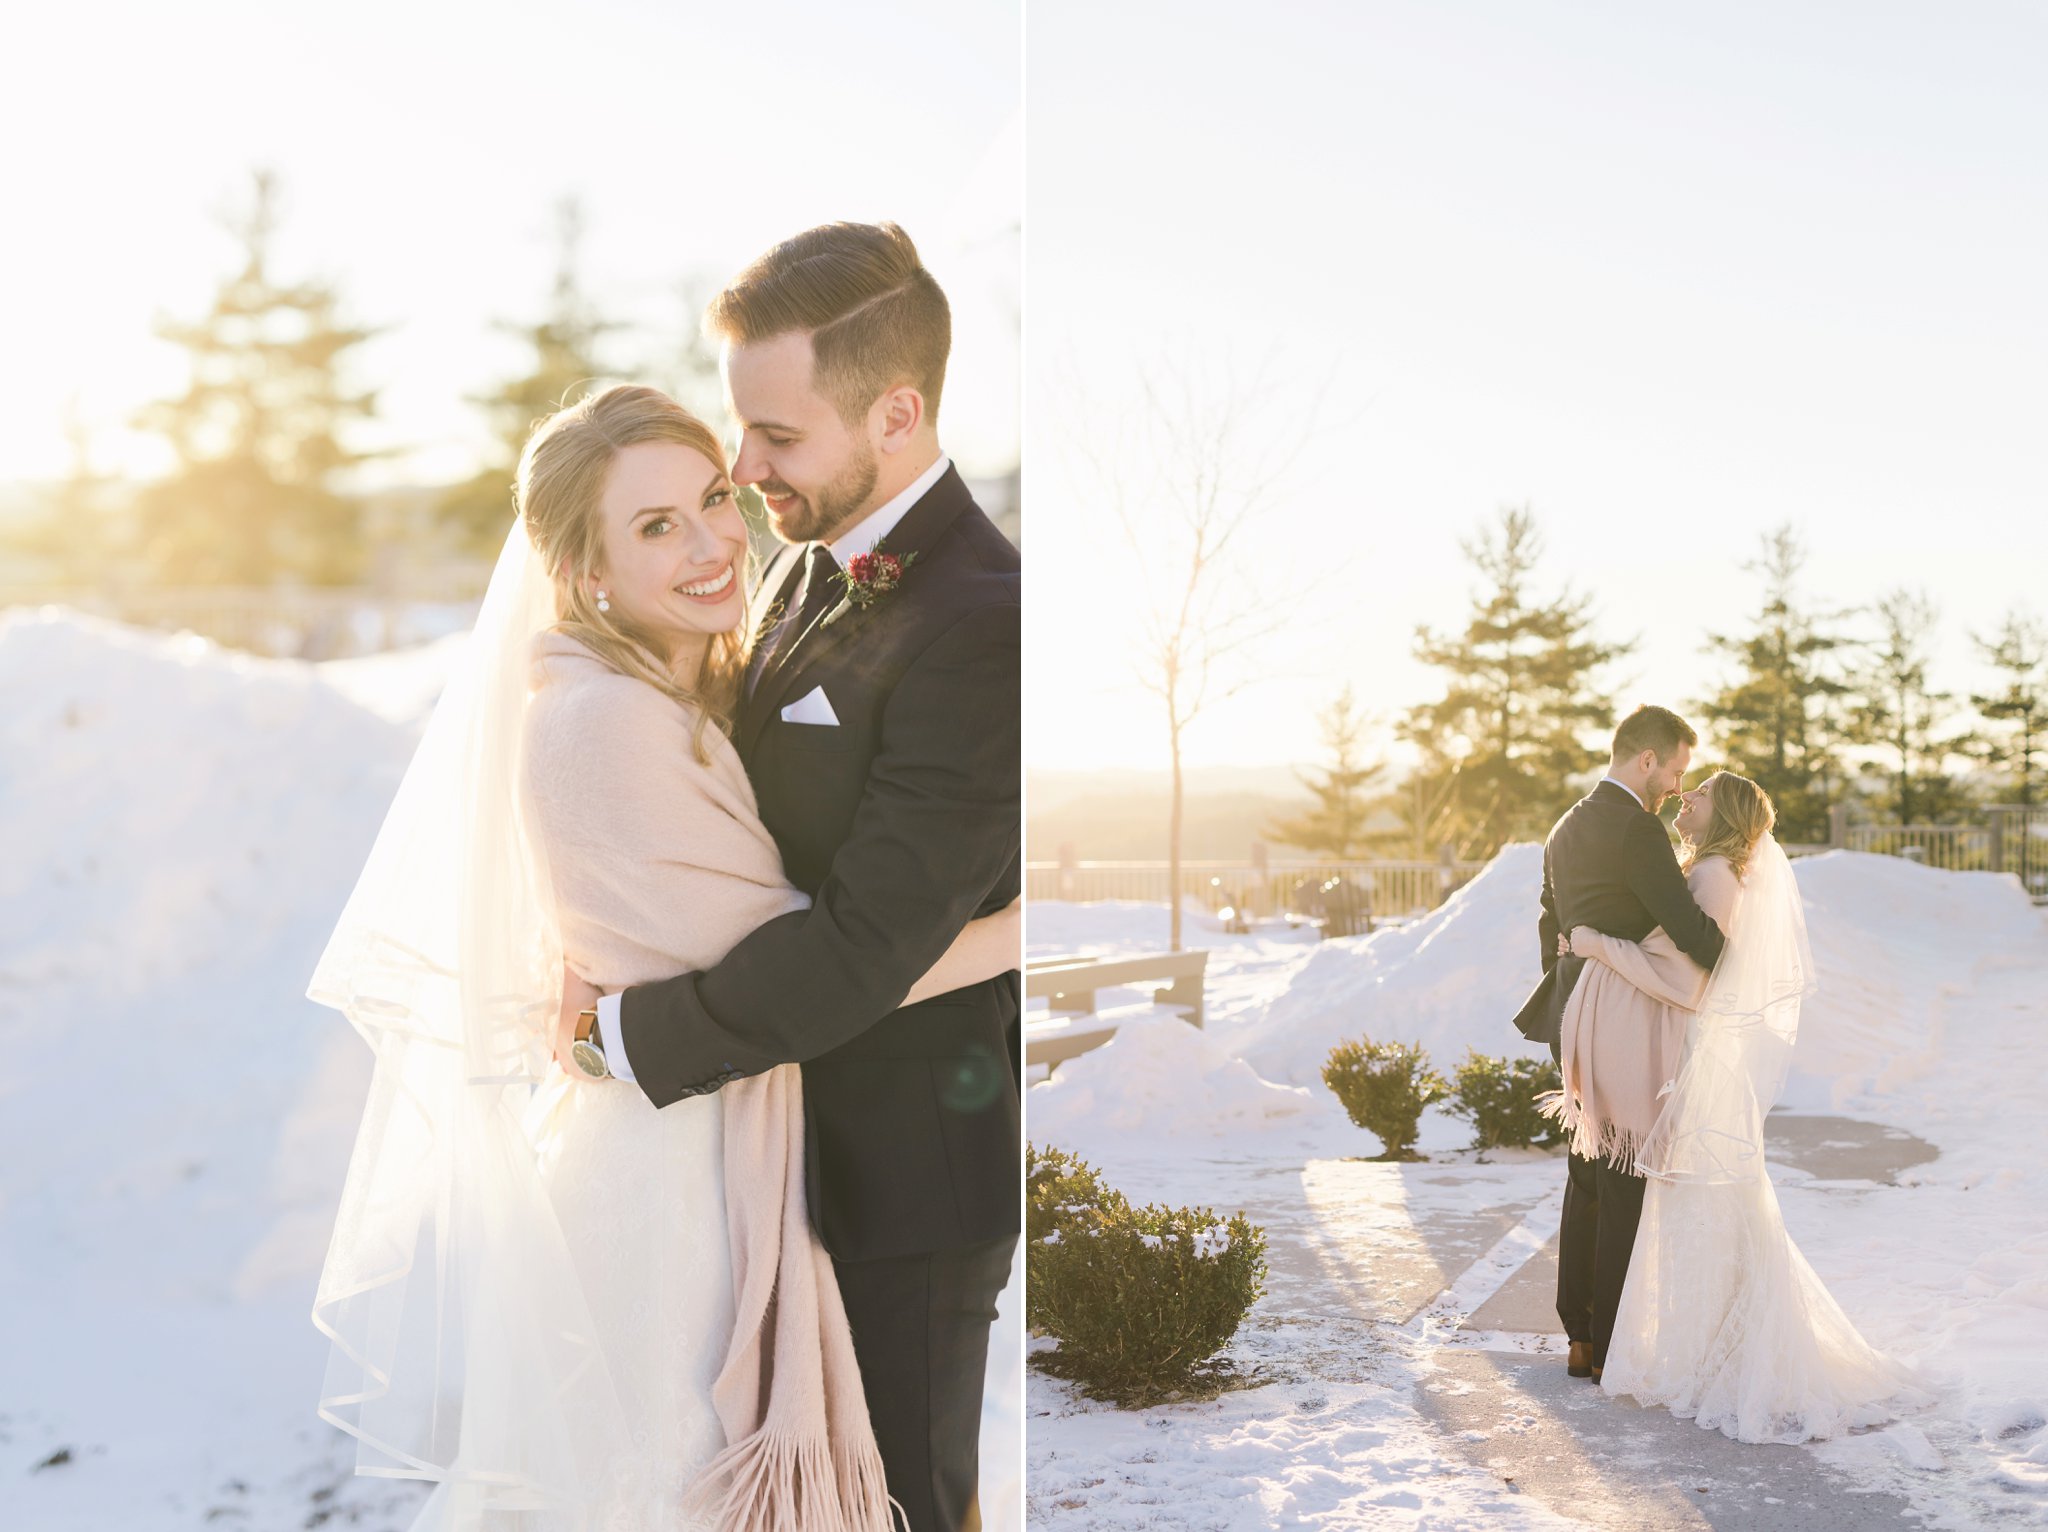 Golden hour portraits at the Winter wedding at Le Belvedere